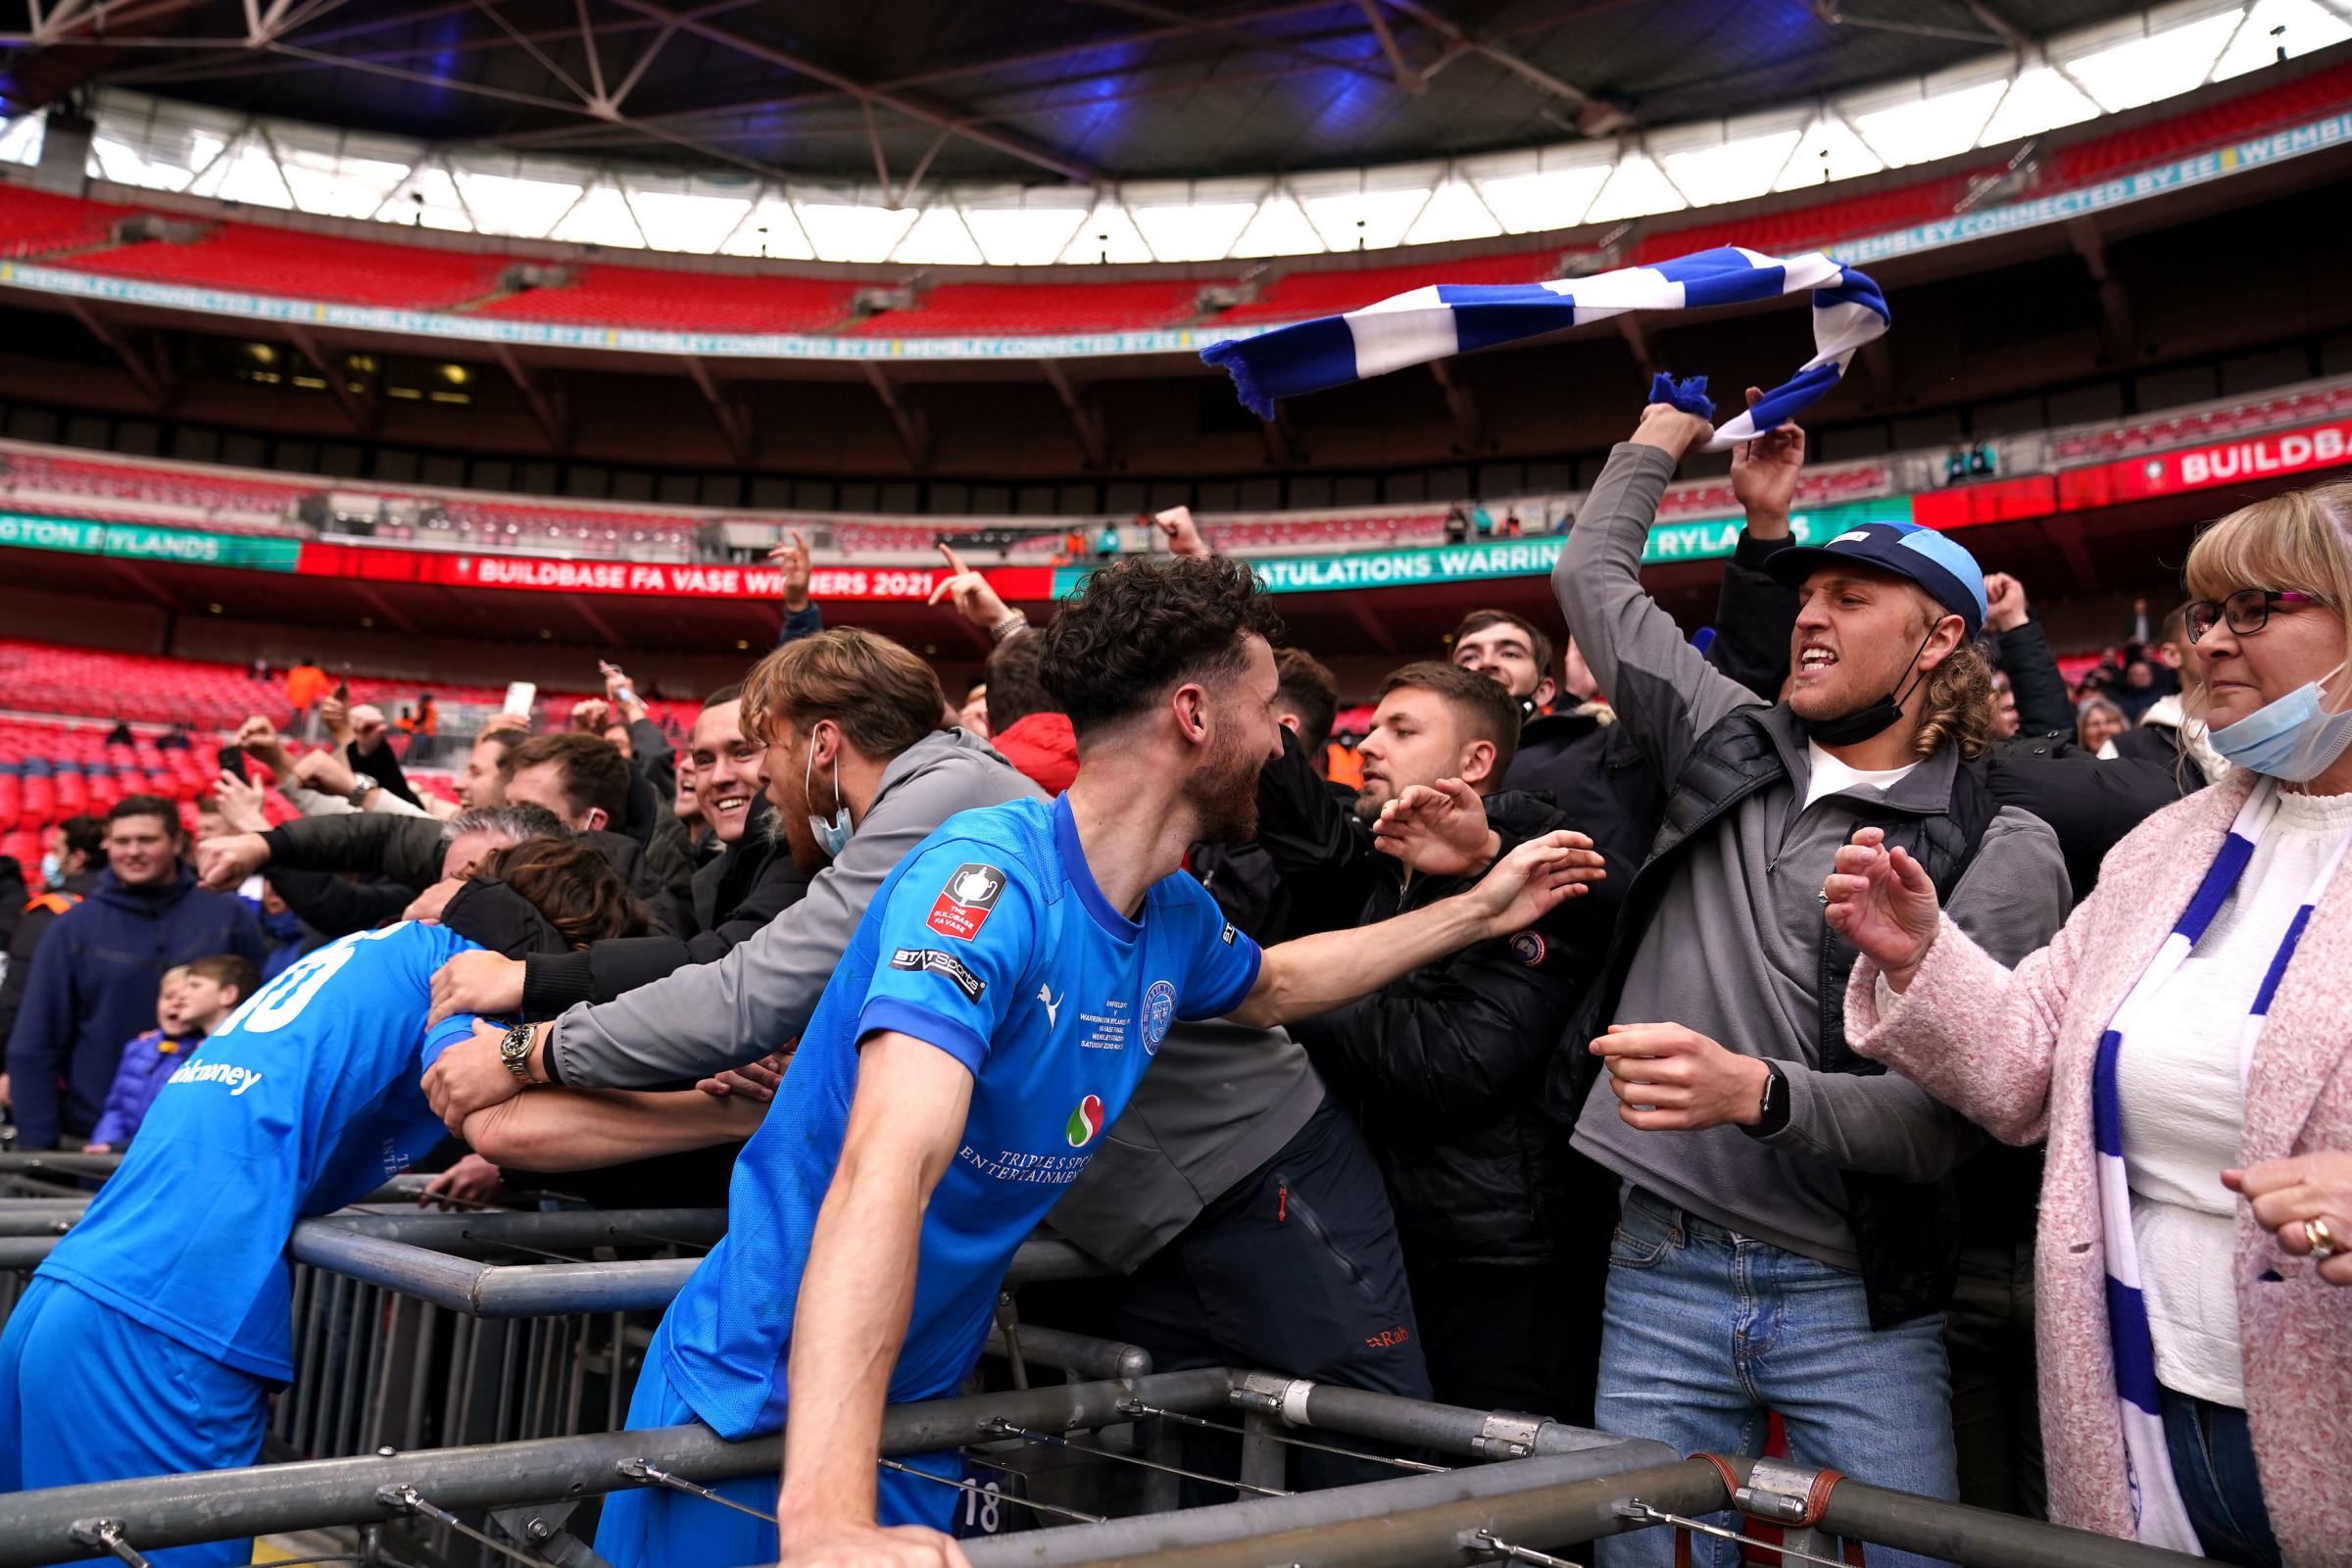 Warrington Rylands fans and players celebrate winning the Buildbase FA Vase 2020/21 Final at Wembley Stadium, London. Picture date: Saturday May 22, 2021. PA Photo. See PA story SOCCER Vase. Photo credit should read: Zac Goodwin/PA Wire. RESTRICTIONS: